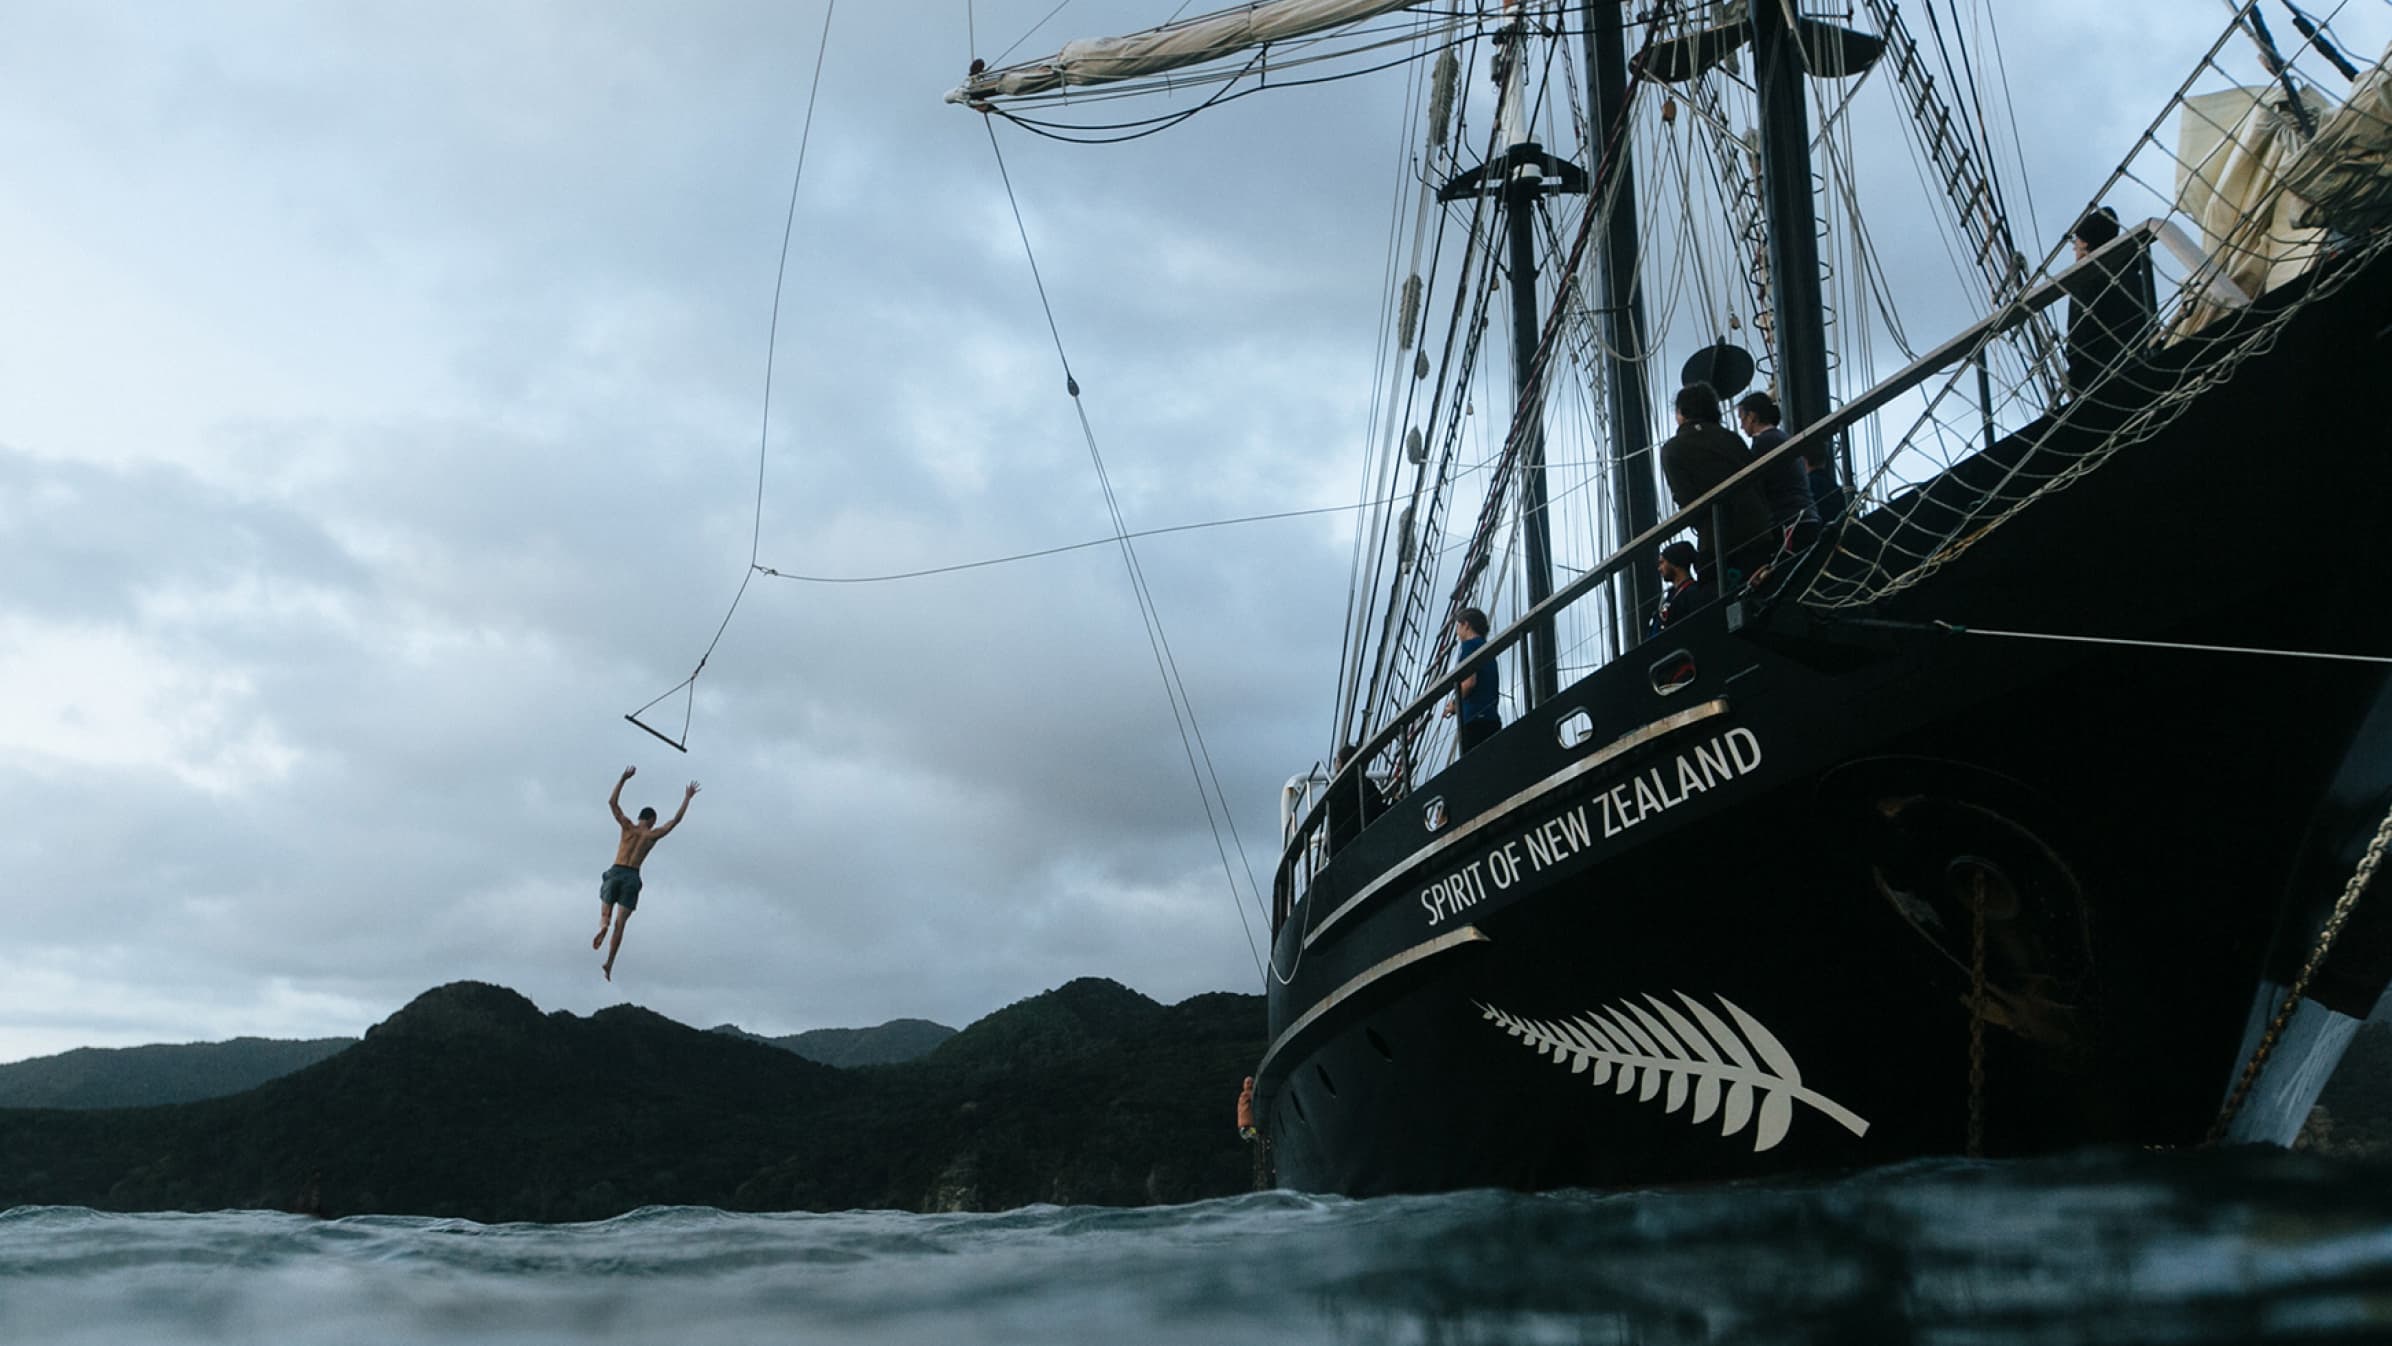 A passenger on the Spirit of Adventure jumps from a swing on the ship into the sea.